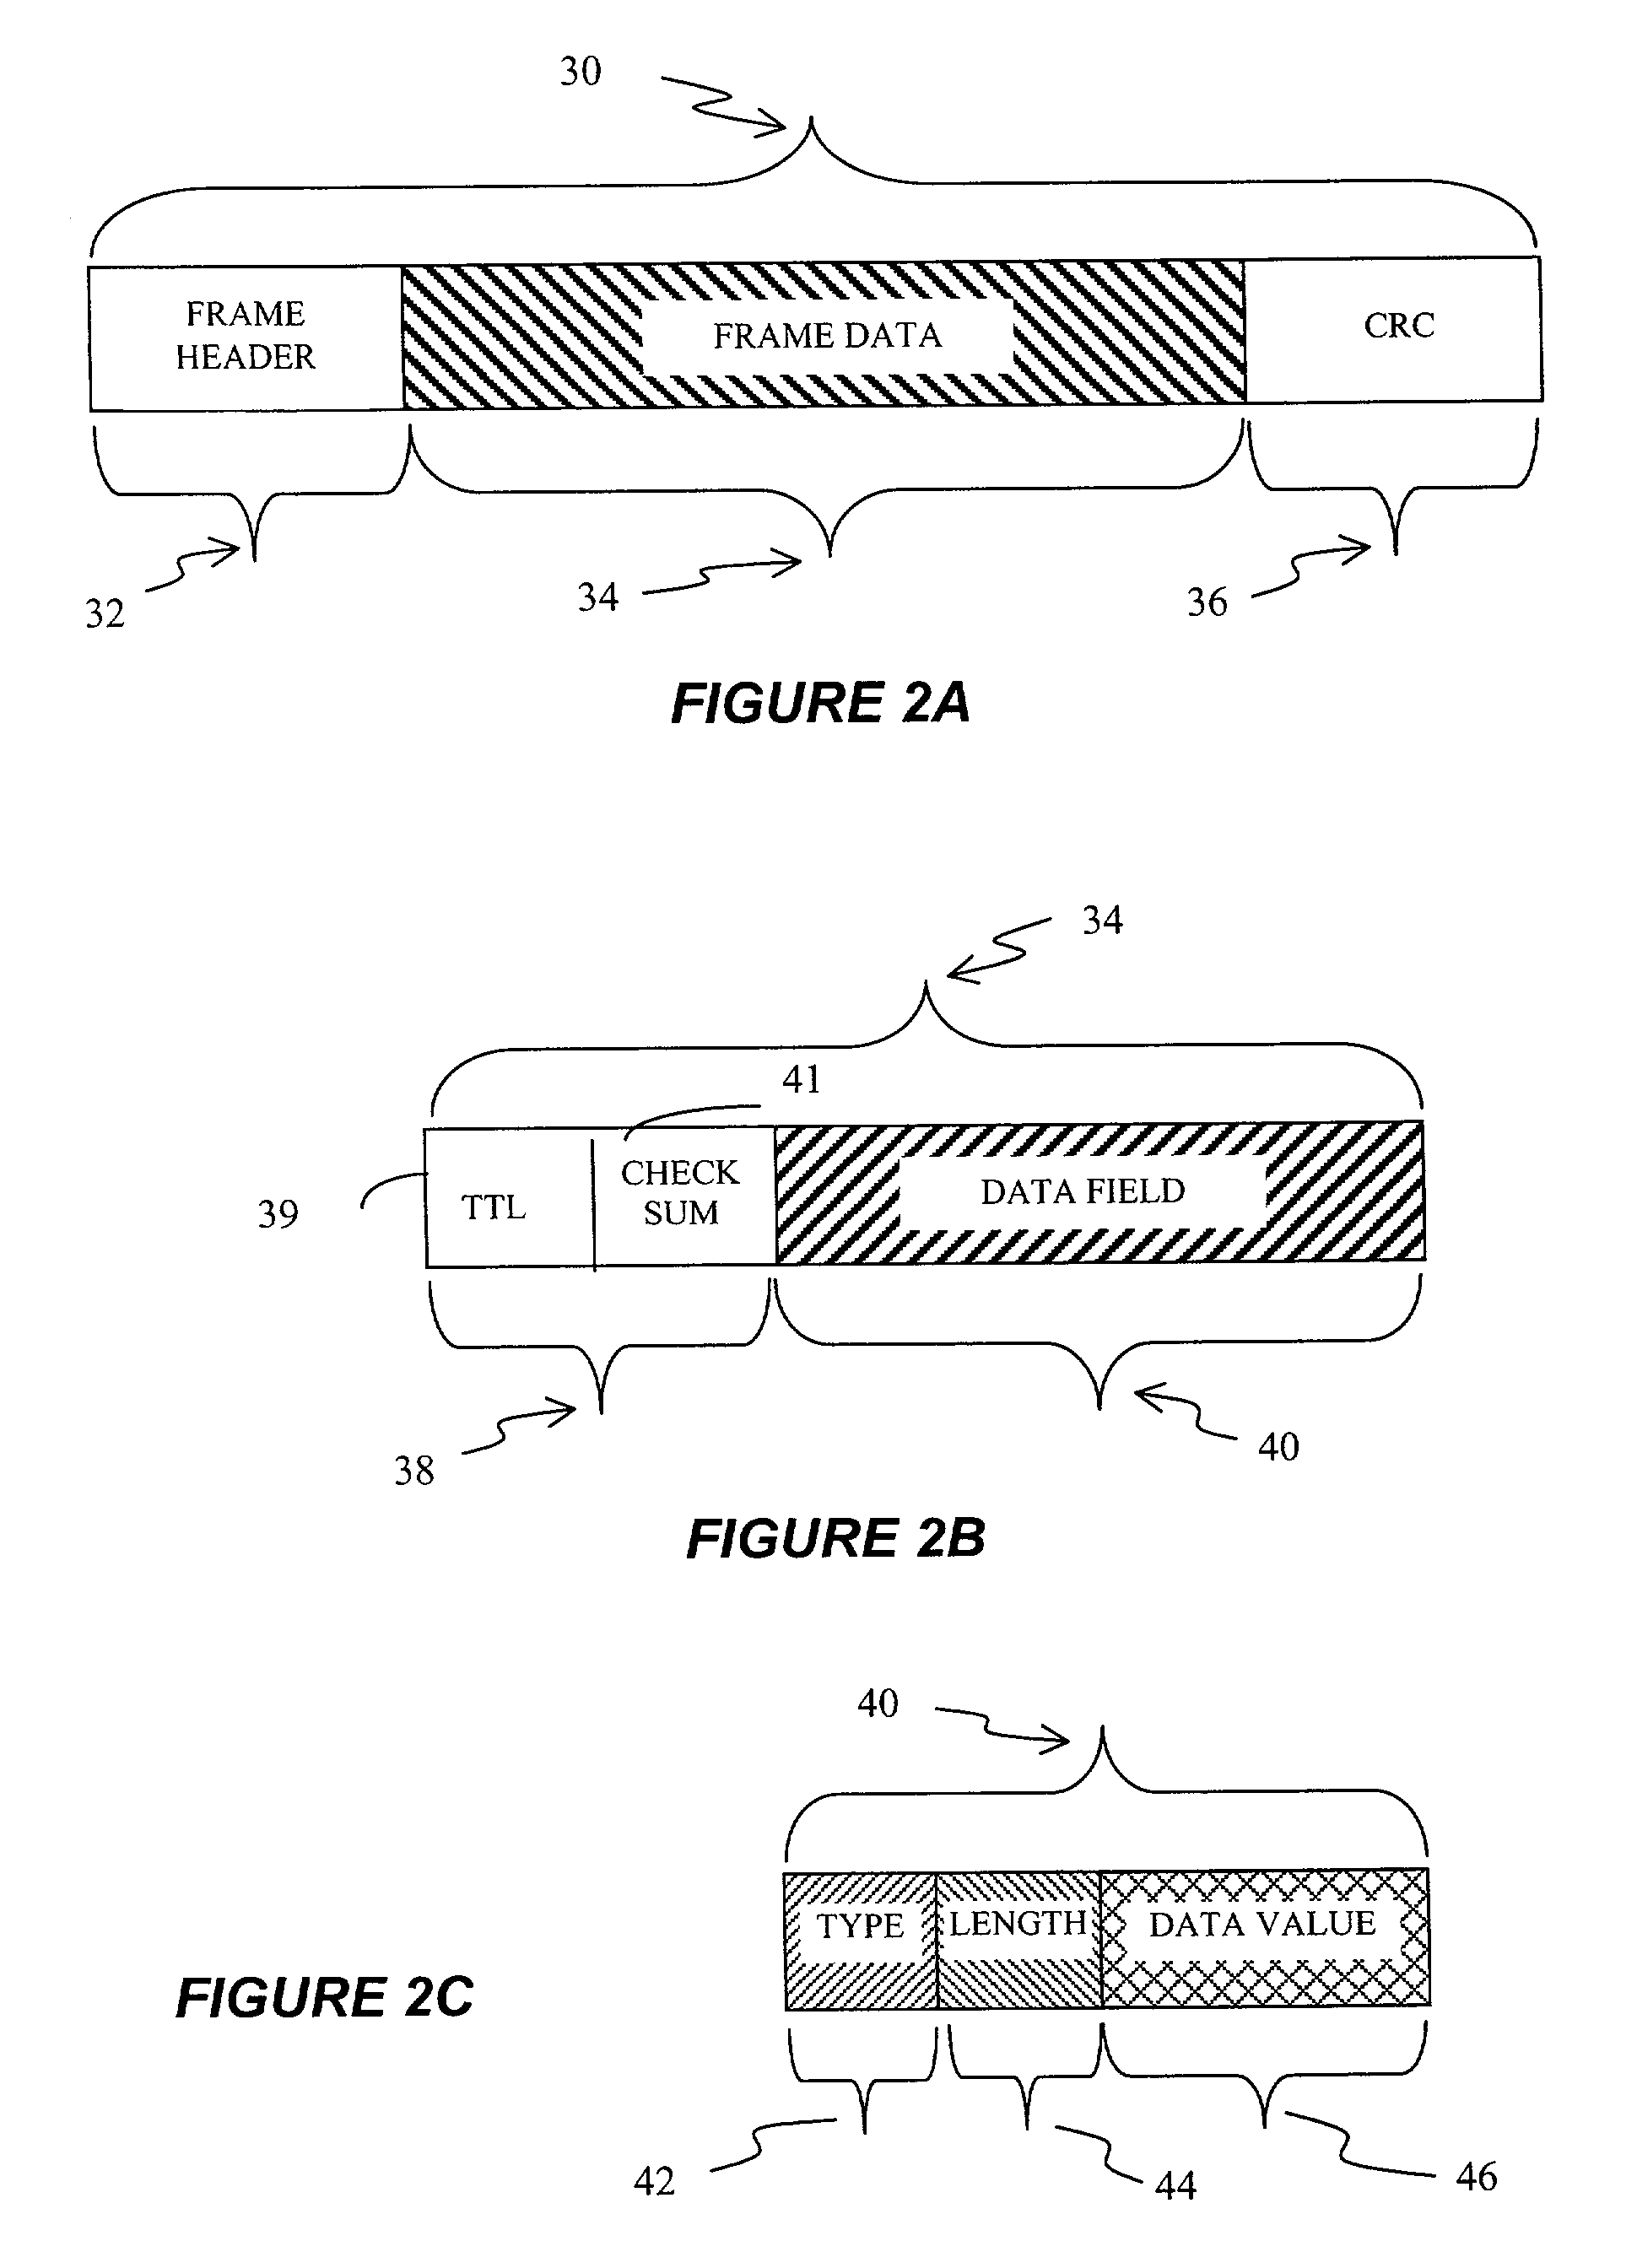 Method and system for automatic address allocation in a network and network protocol therefor